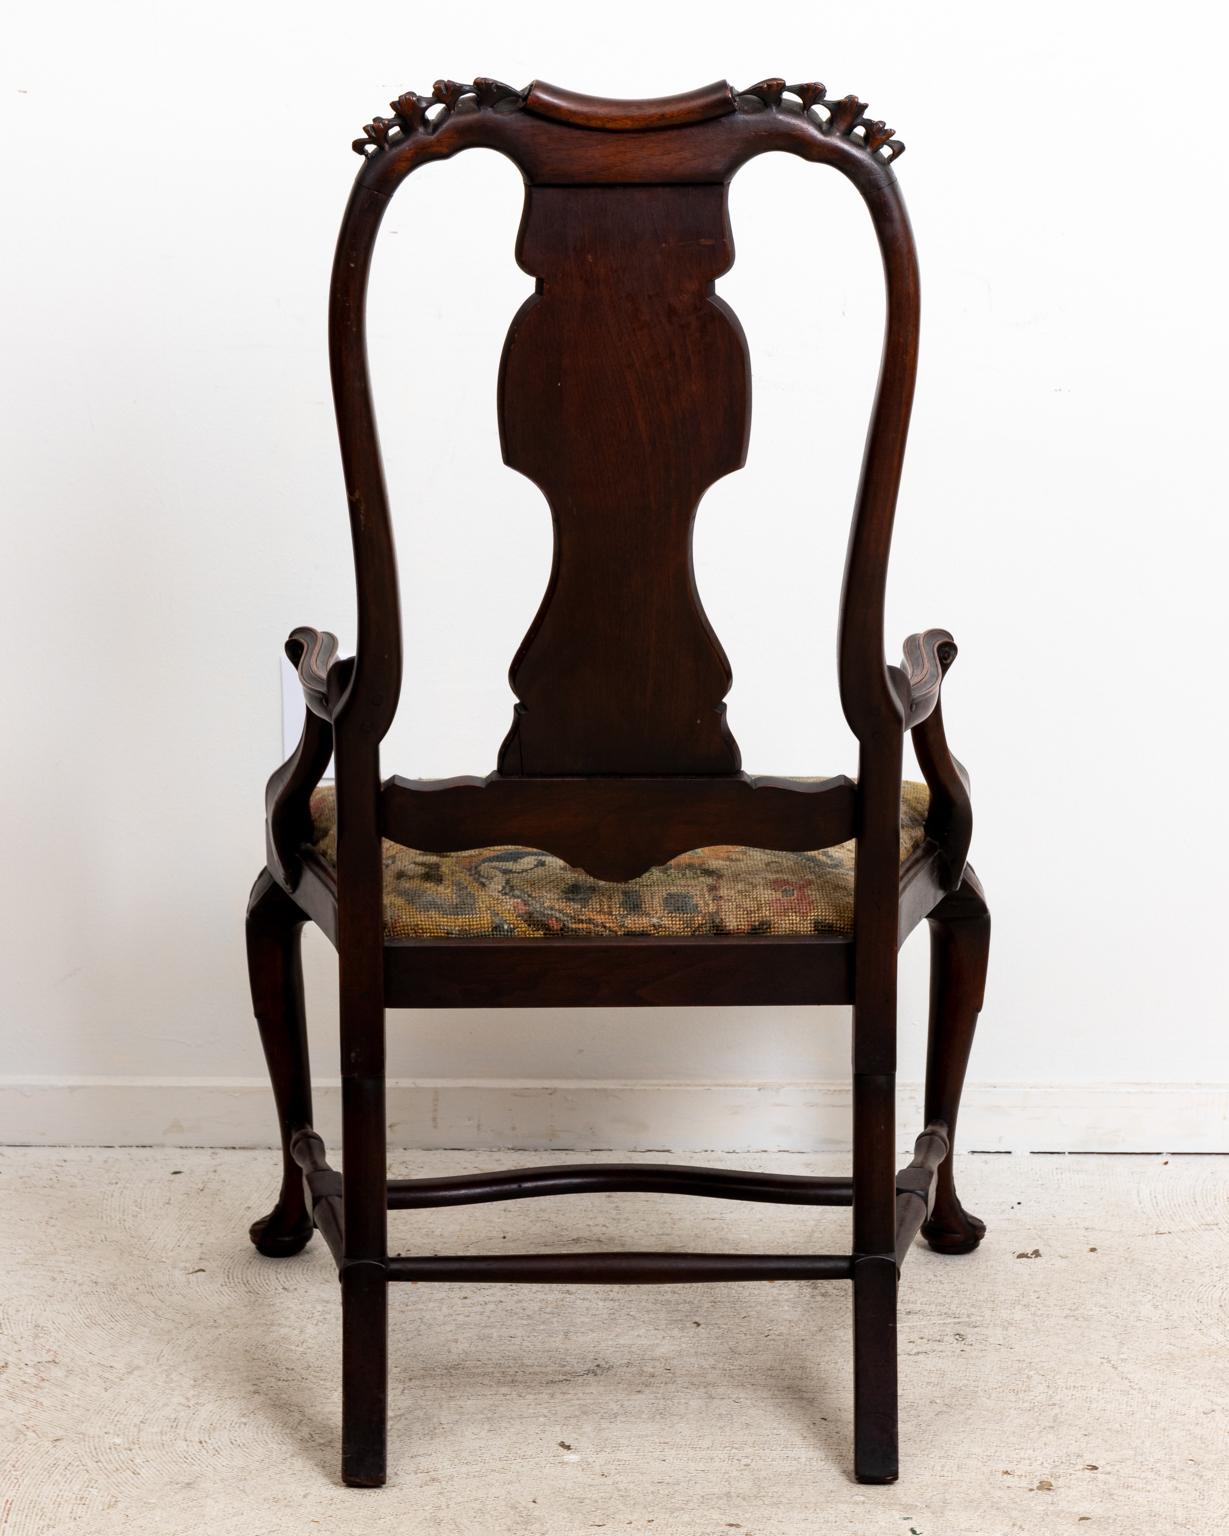 Irish Queen Anne style armchair with upholstered seat and cabriole legs. The piece also features carved, pierced floral trim on the corners of the molded top rail, a pierced back splat, and carved scallop shellwork on the front of the seat rail.